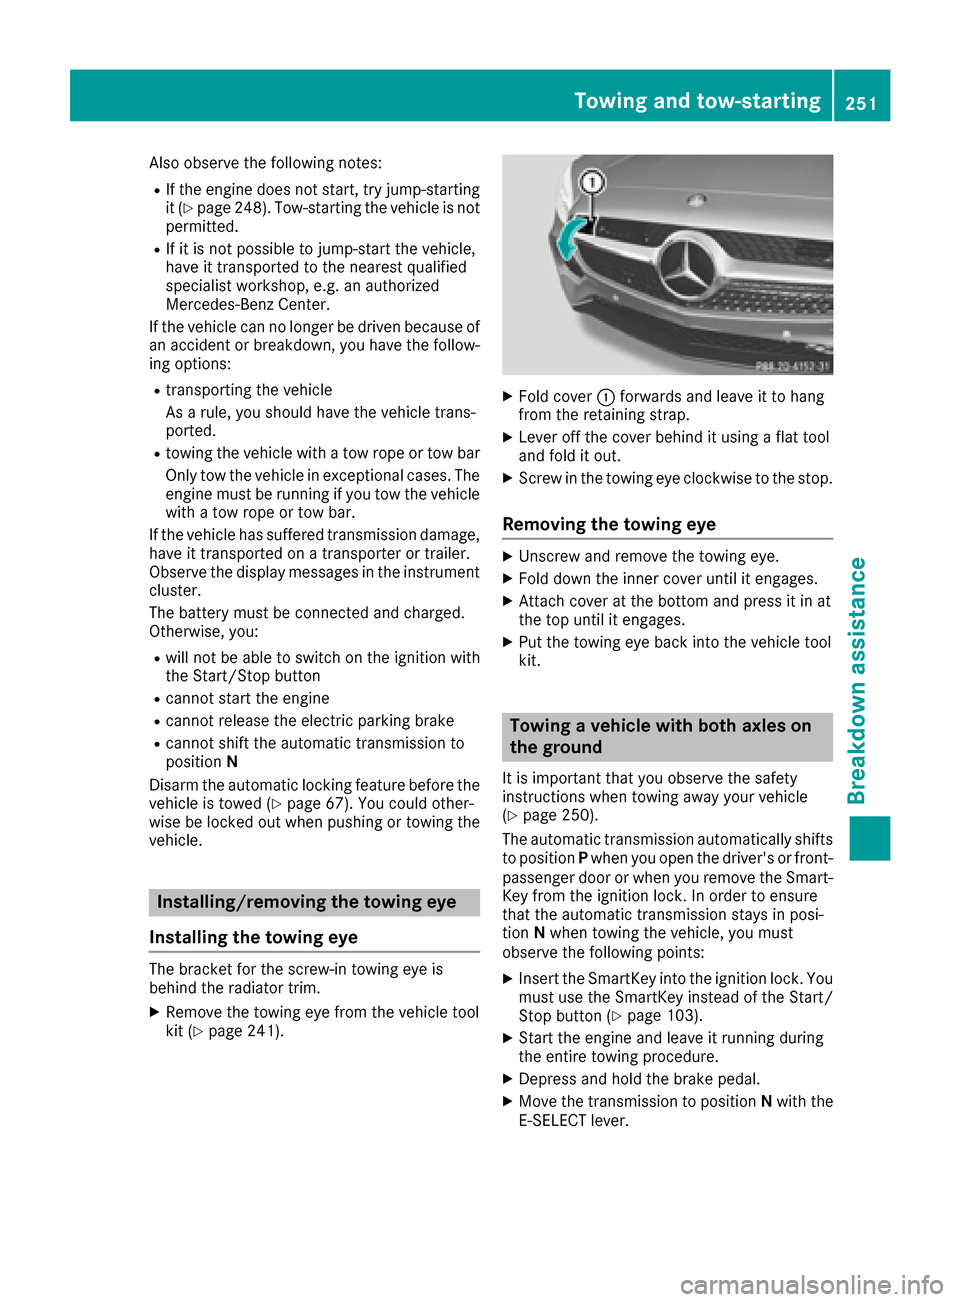 MERCEDES-BENZ AMG GT S 2017 C190 Workshop Manual Also observe the following notes:
RIf the engine does not start, try jump-starting
it (Ypage 248). Tow-starting the vehicle is not
permitted.
RIf it is not possible to jump-start the vehicle,
have it 